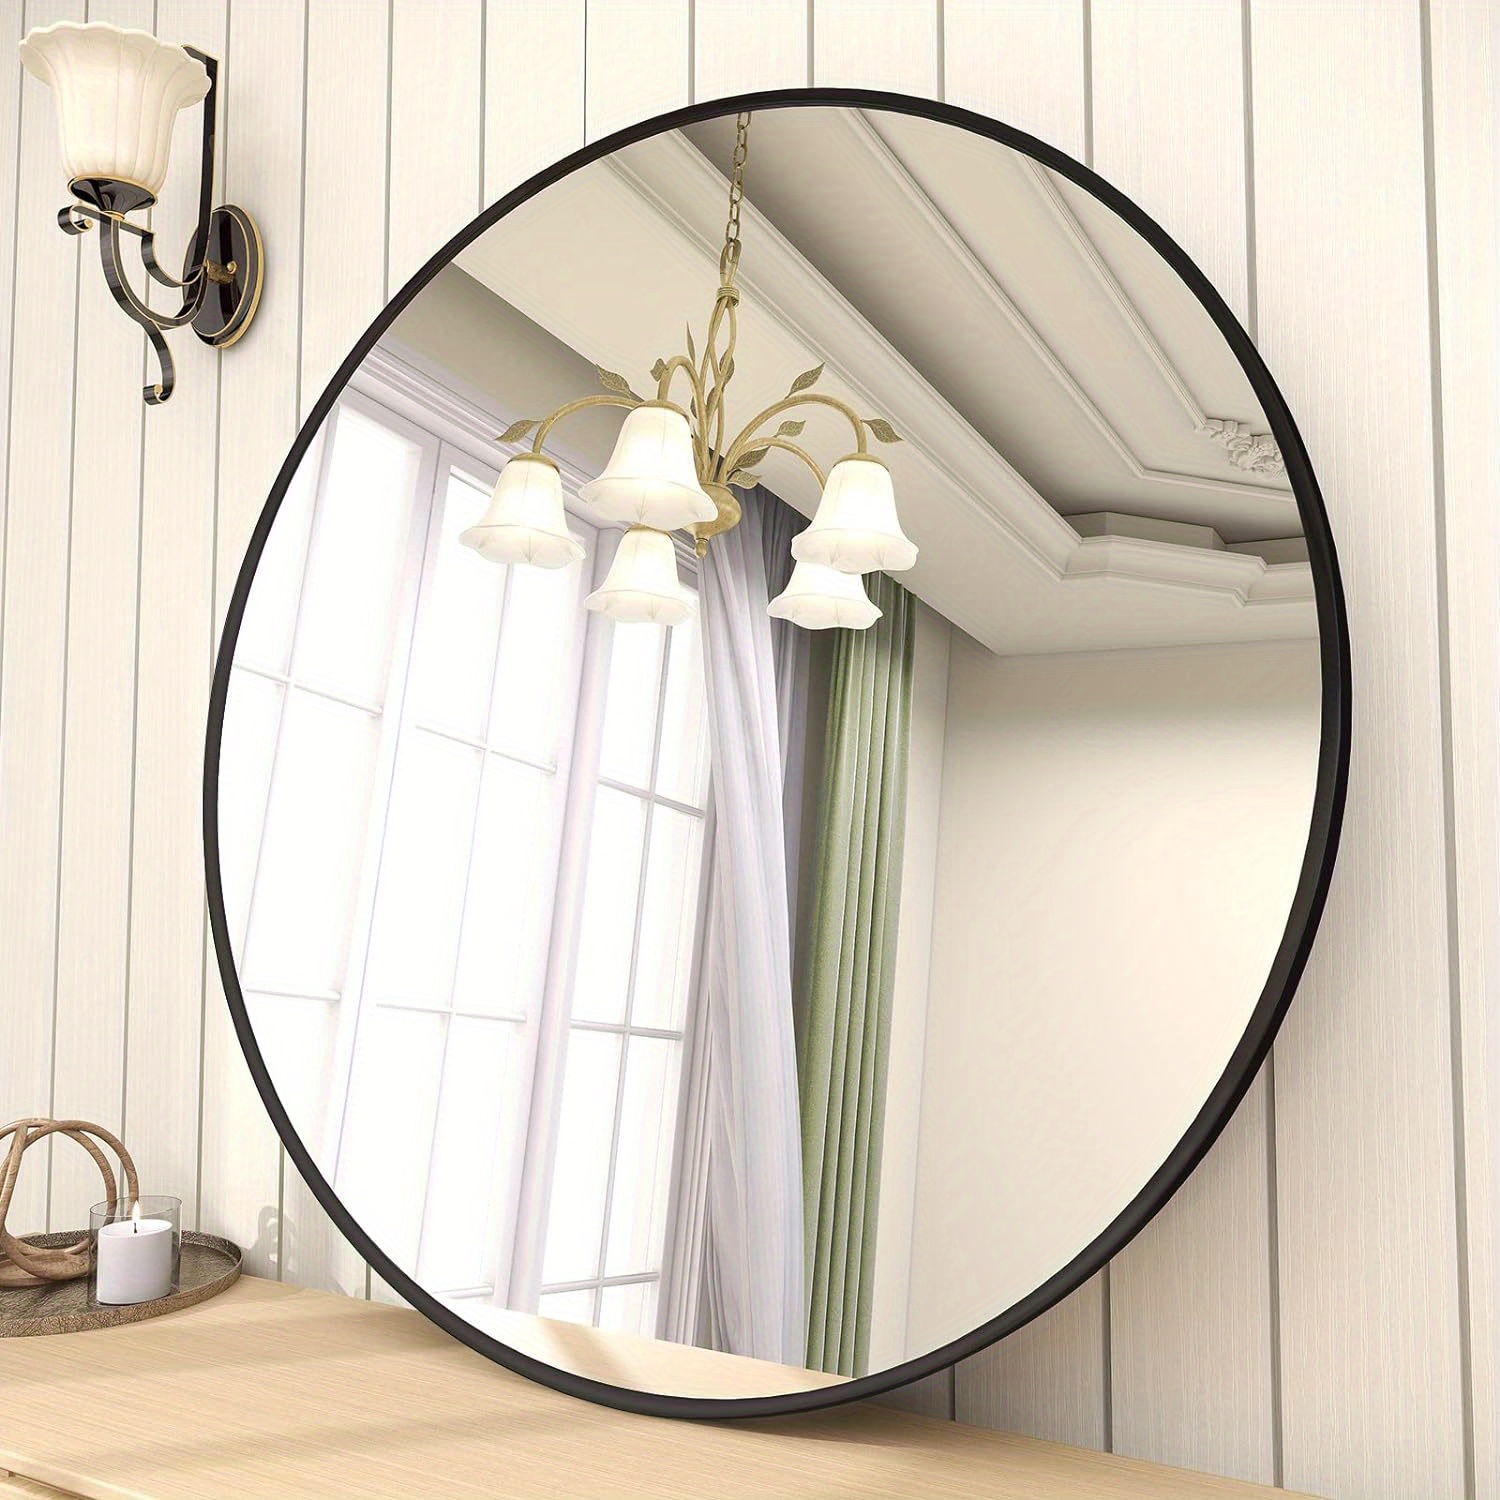 

Circle Mirror Black 20/24/30/36 Inch Wall Mounted Round Mirror With Brushed Metal Frame For Bathroom, Vanity, Living Room, Bedroom, Entryway Wall Decor (black)